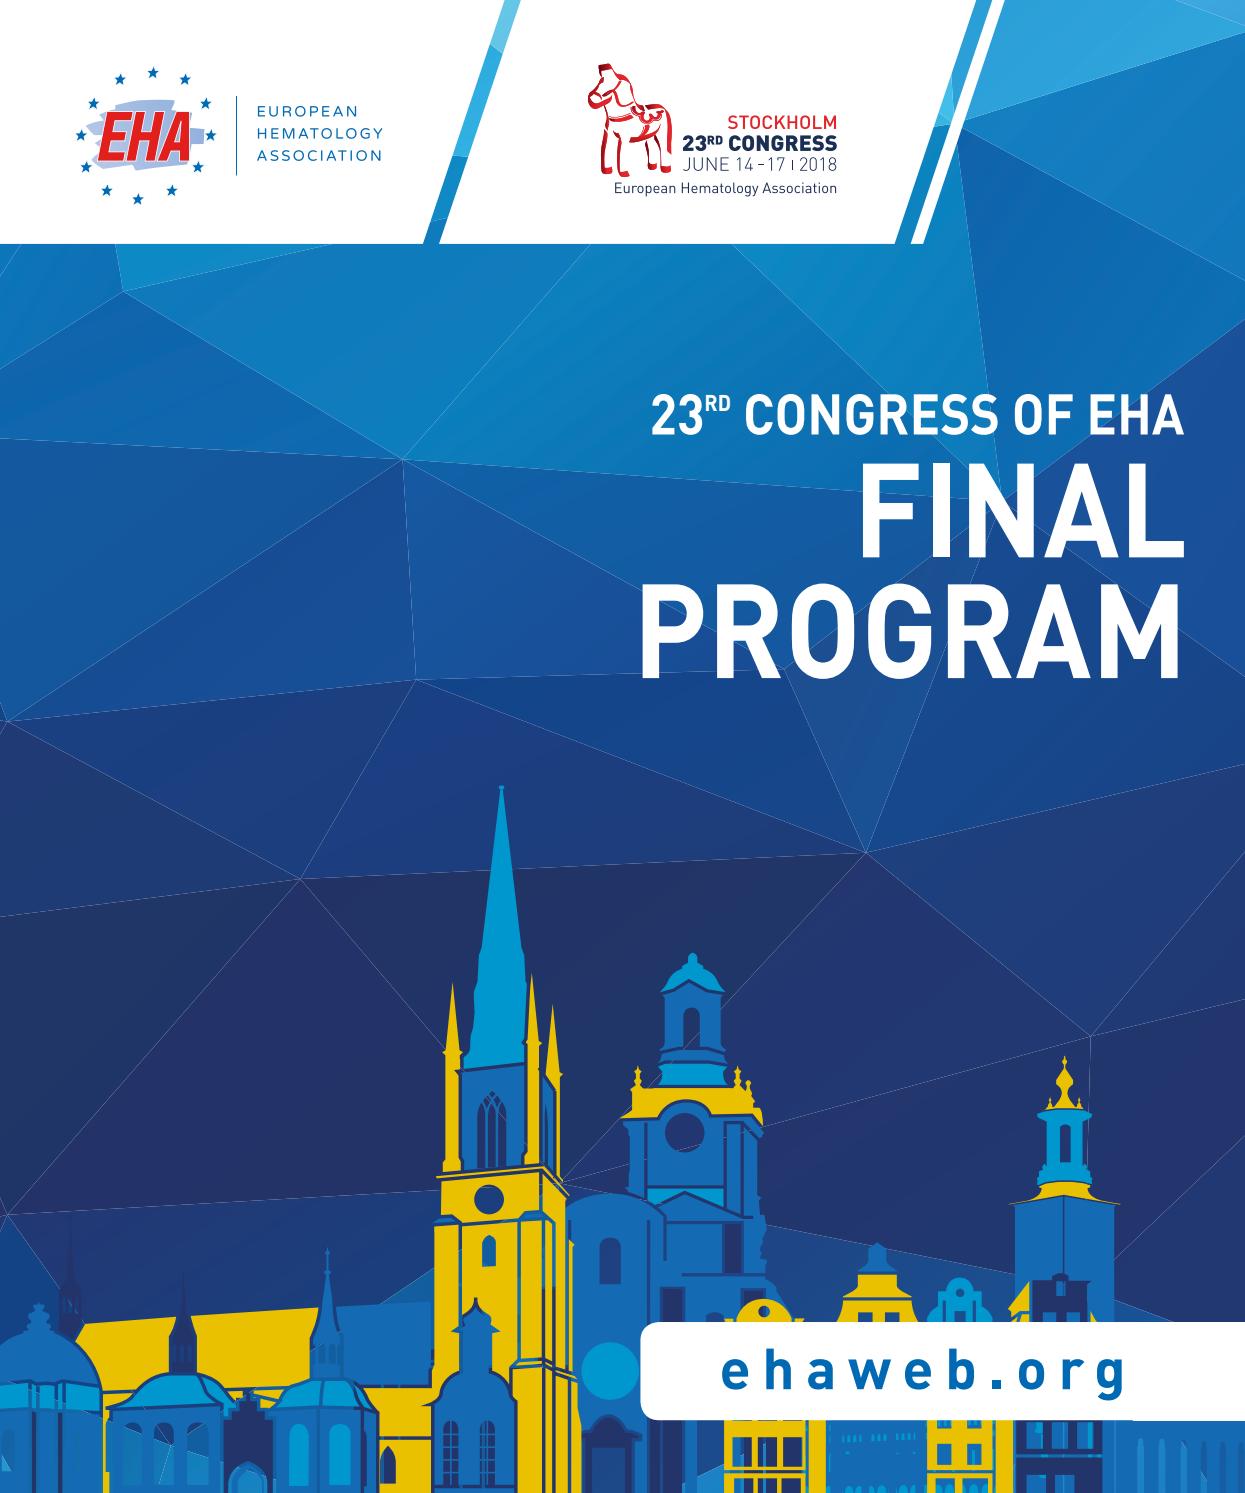 Magasin Canapé Limoges Best Of 23rd Congress Of Eha Final Program by Loyals issuu